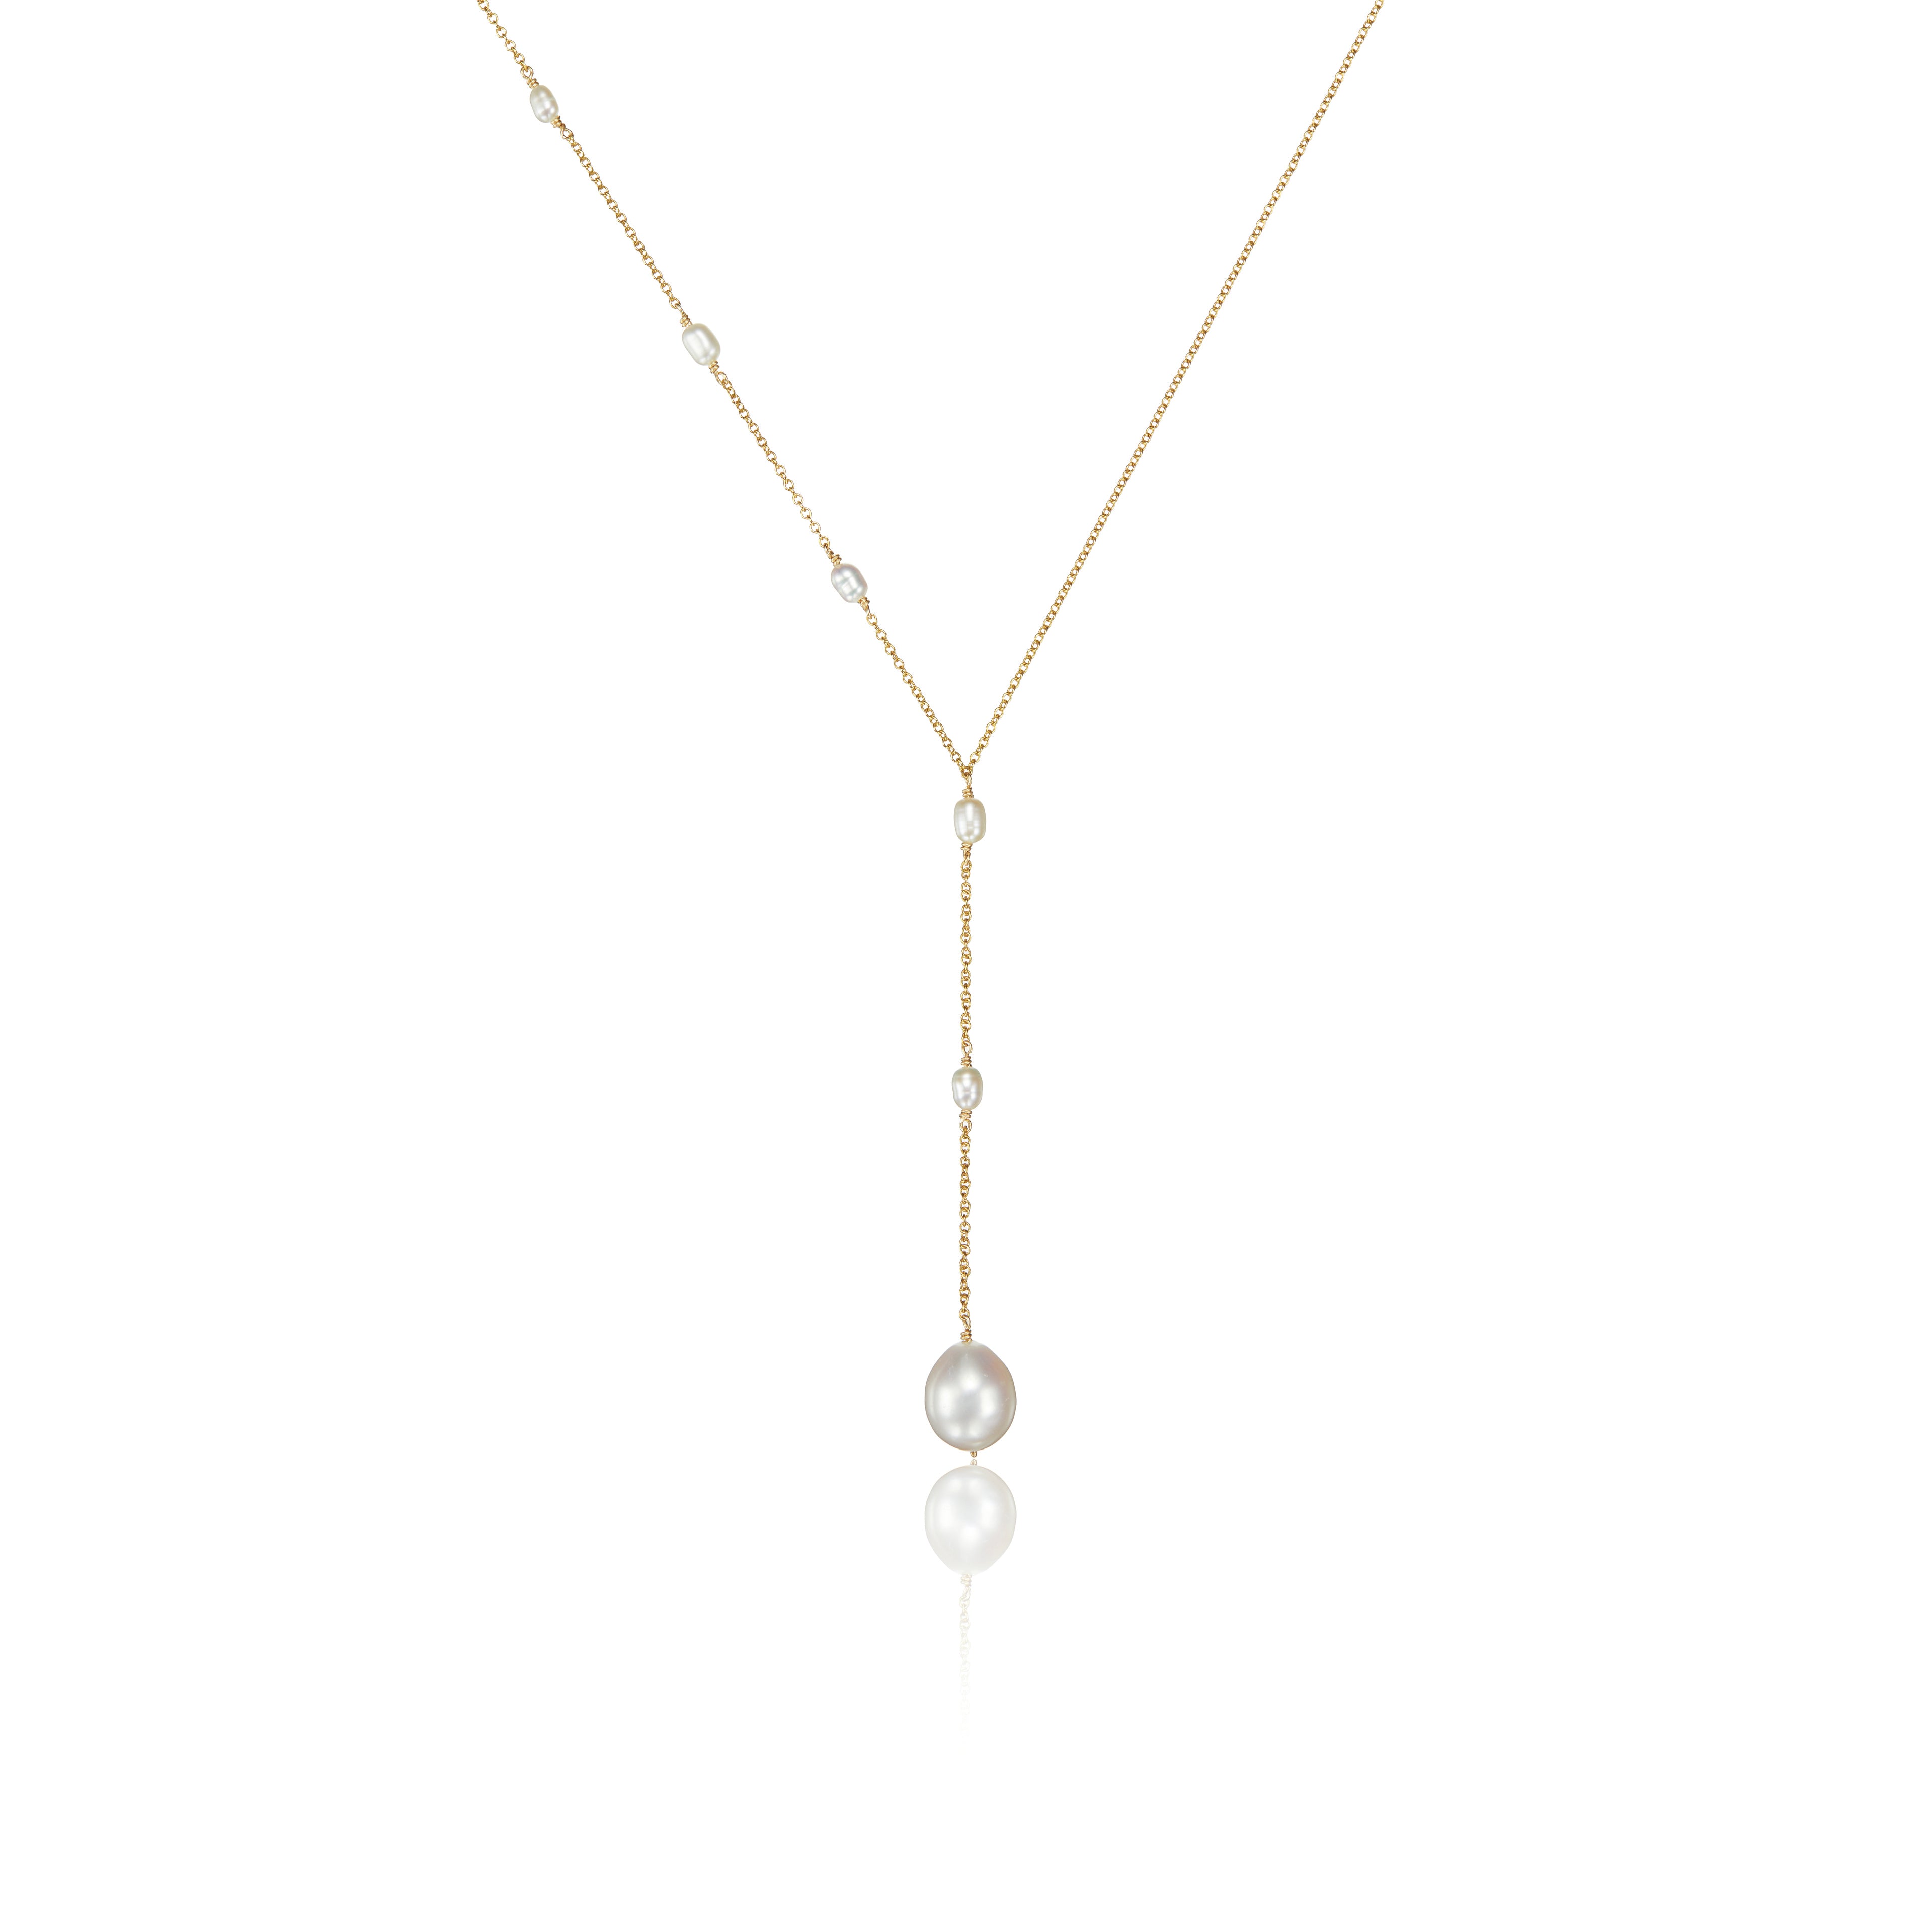 Gold seed pearl lariat necklace on a white background